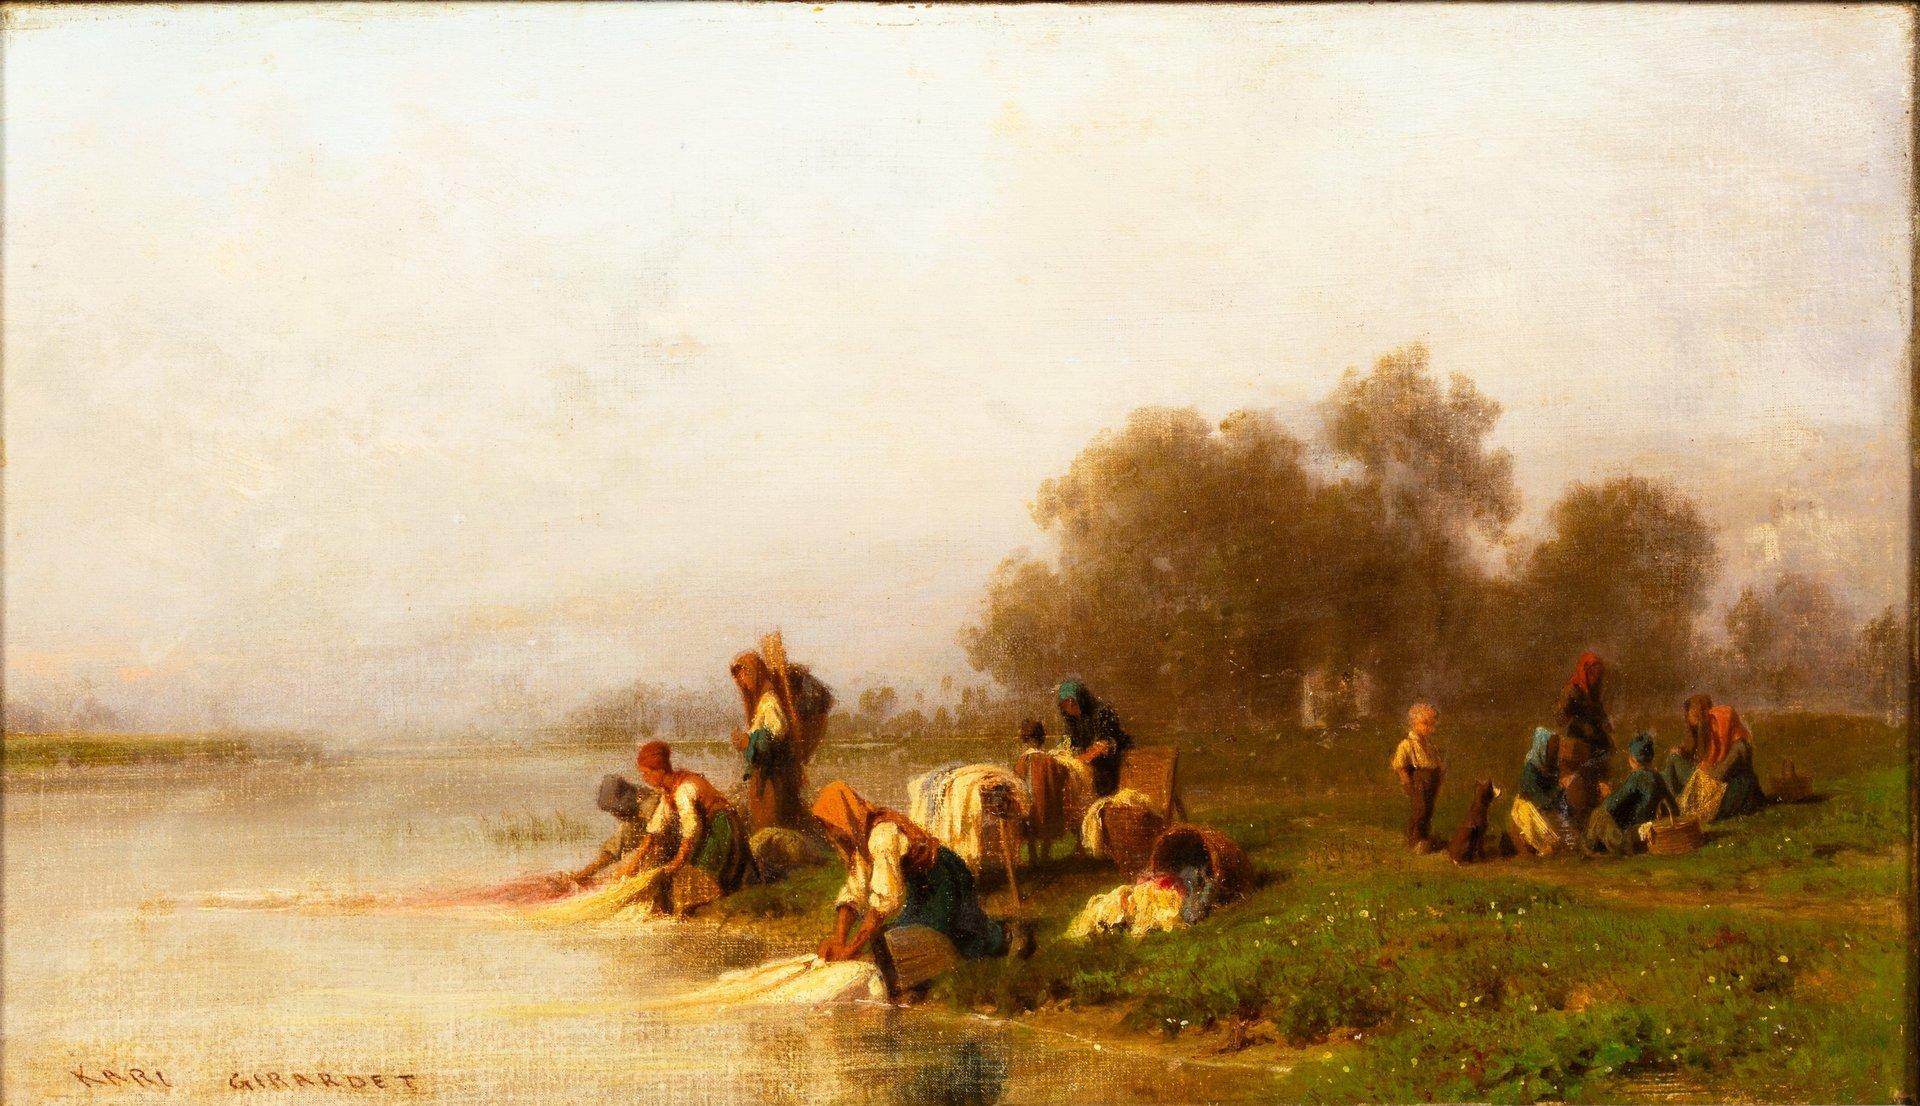 Obersee by François Roffiaen (1820-1898) Oil on canvas For Sale 2